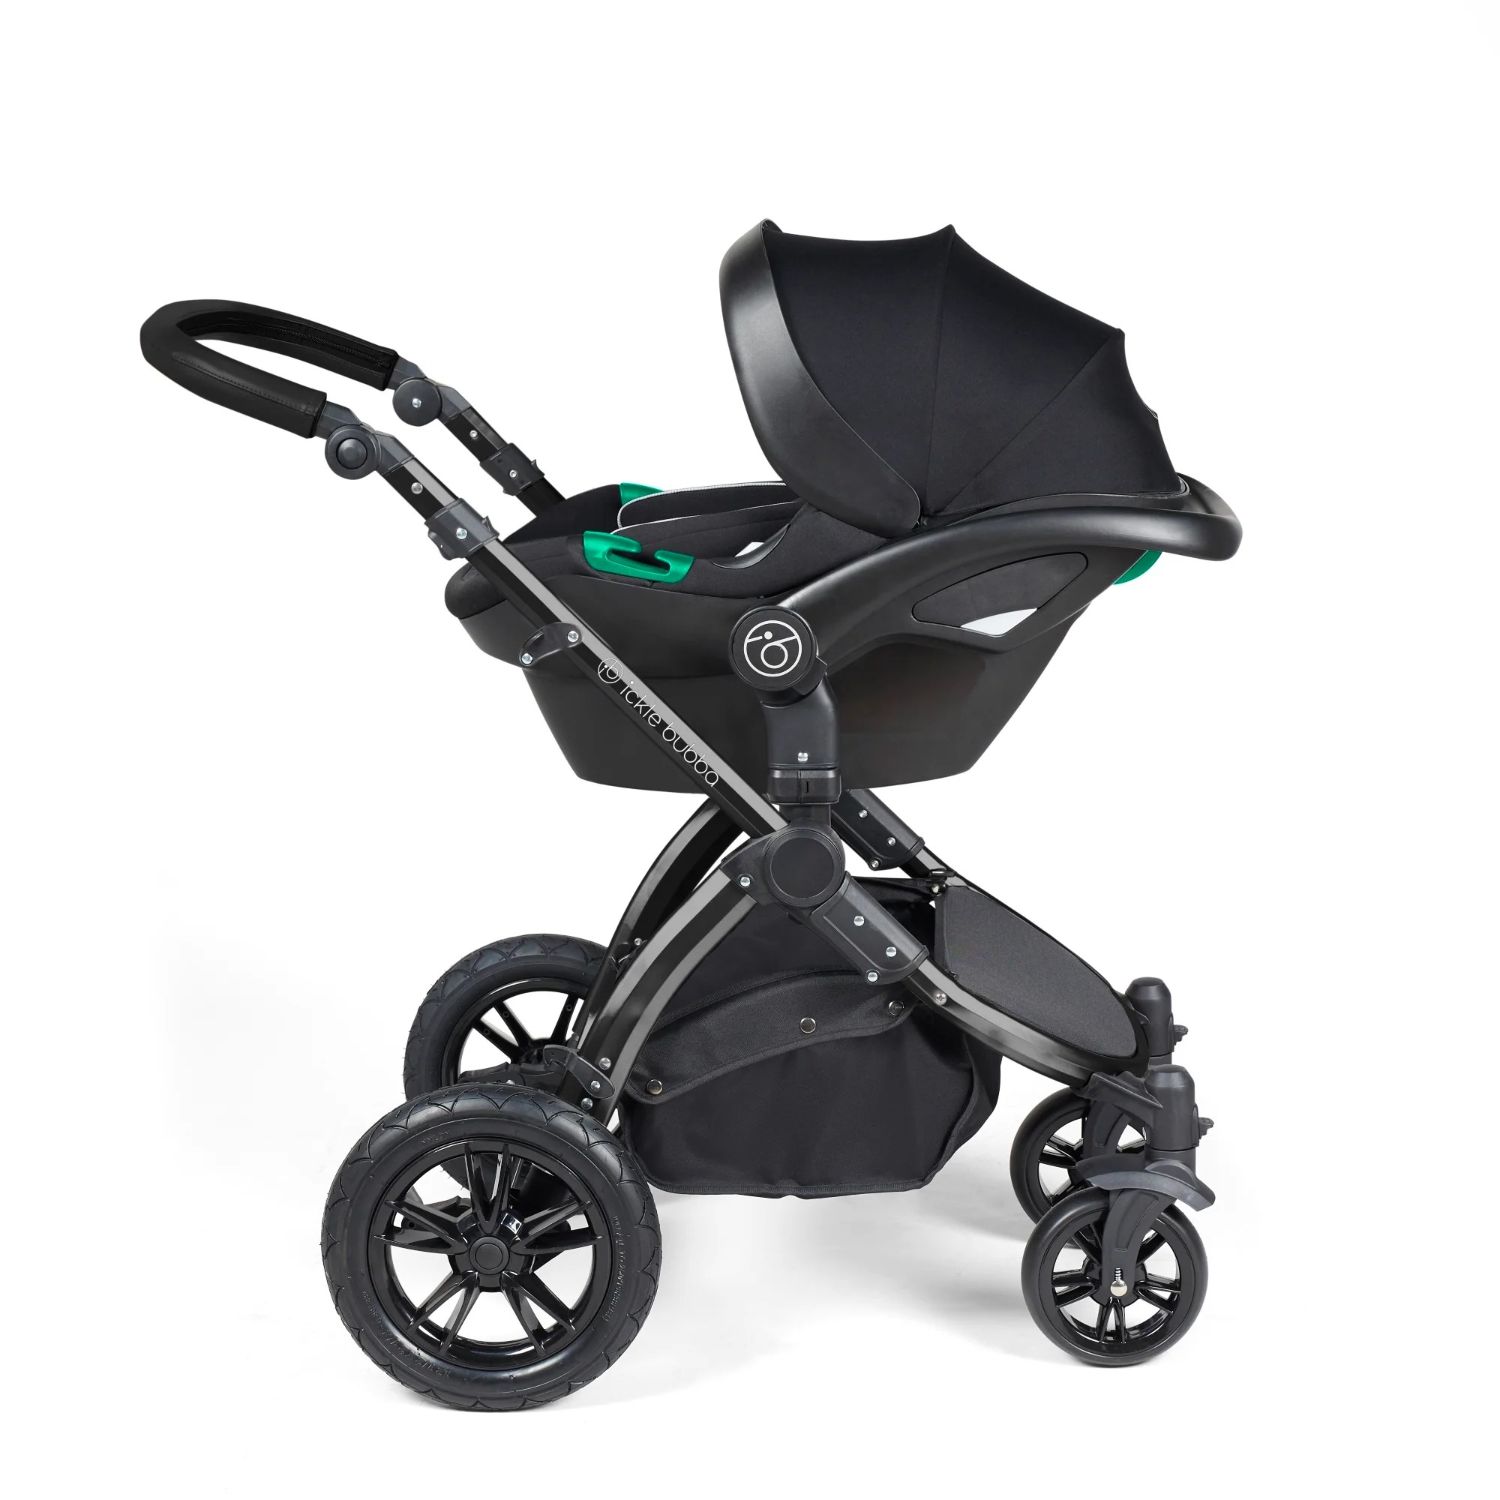 Ickle Bubba Stomp Luxe Pushchair with Stratus i-Size car seat attached in Midnight black colour